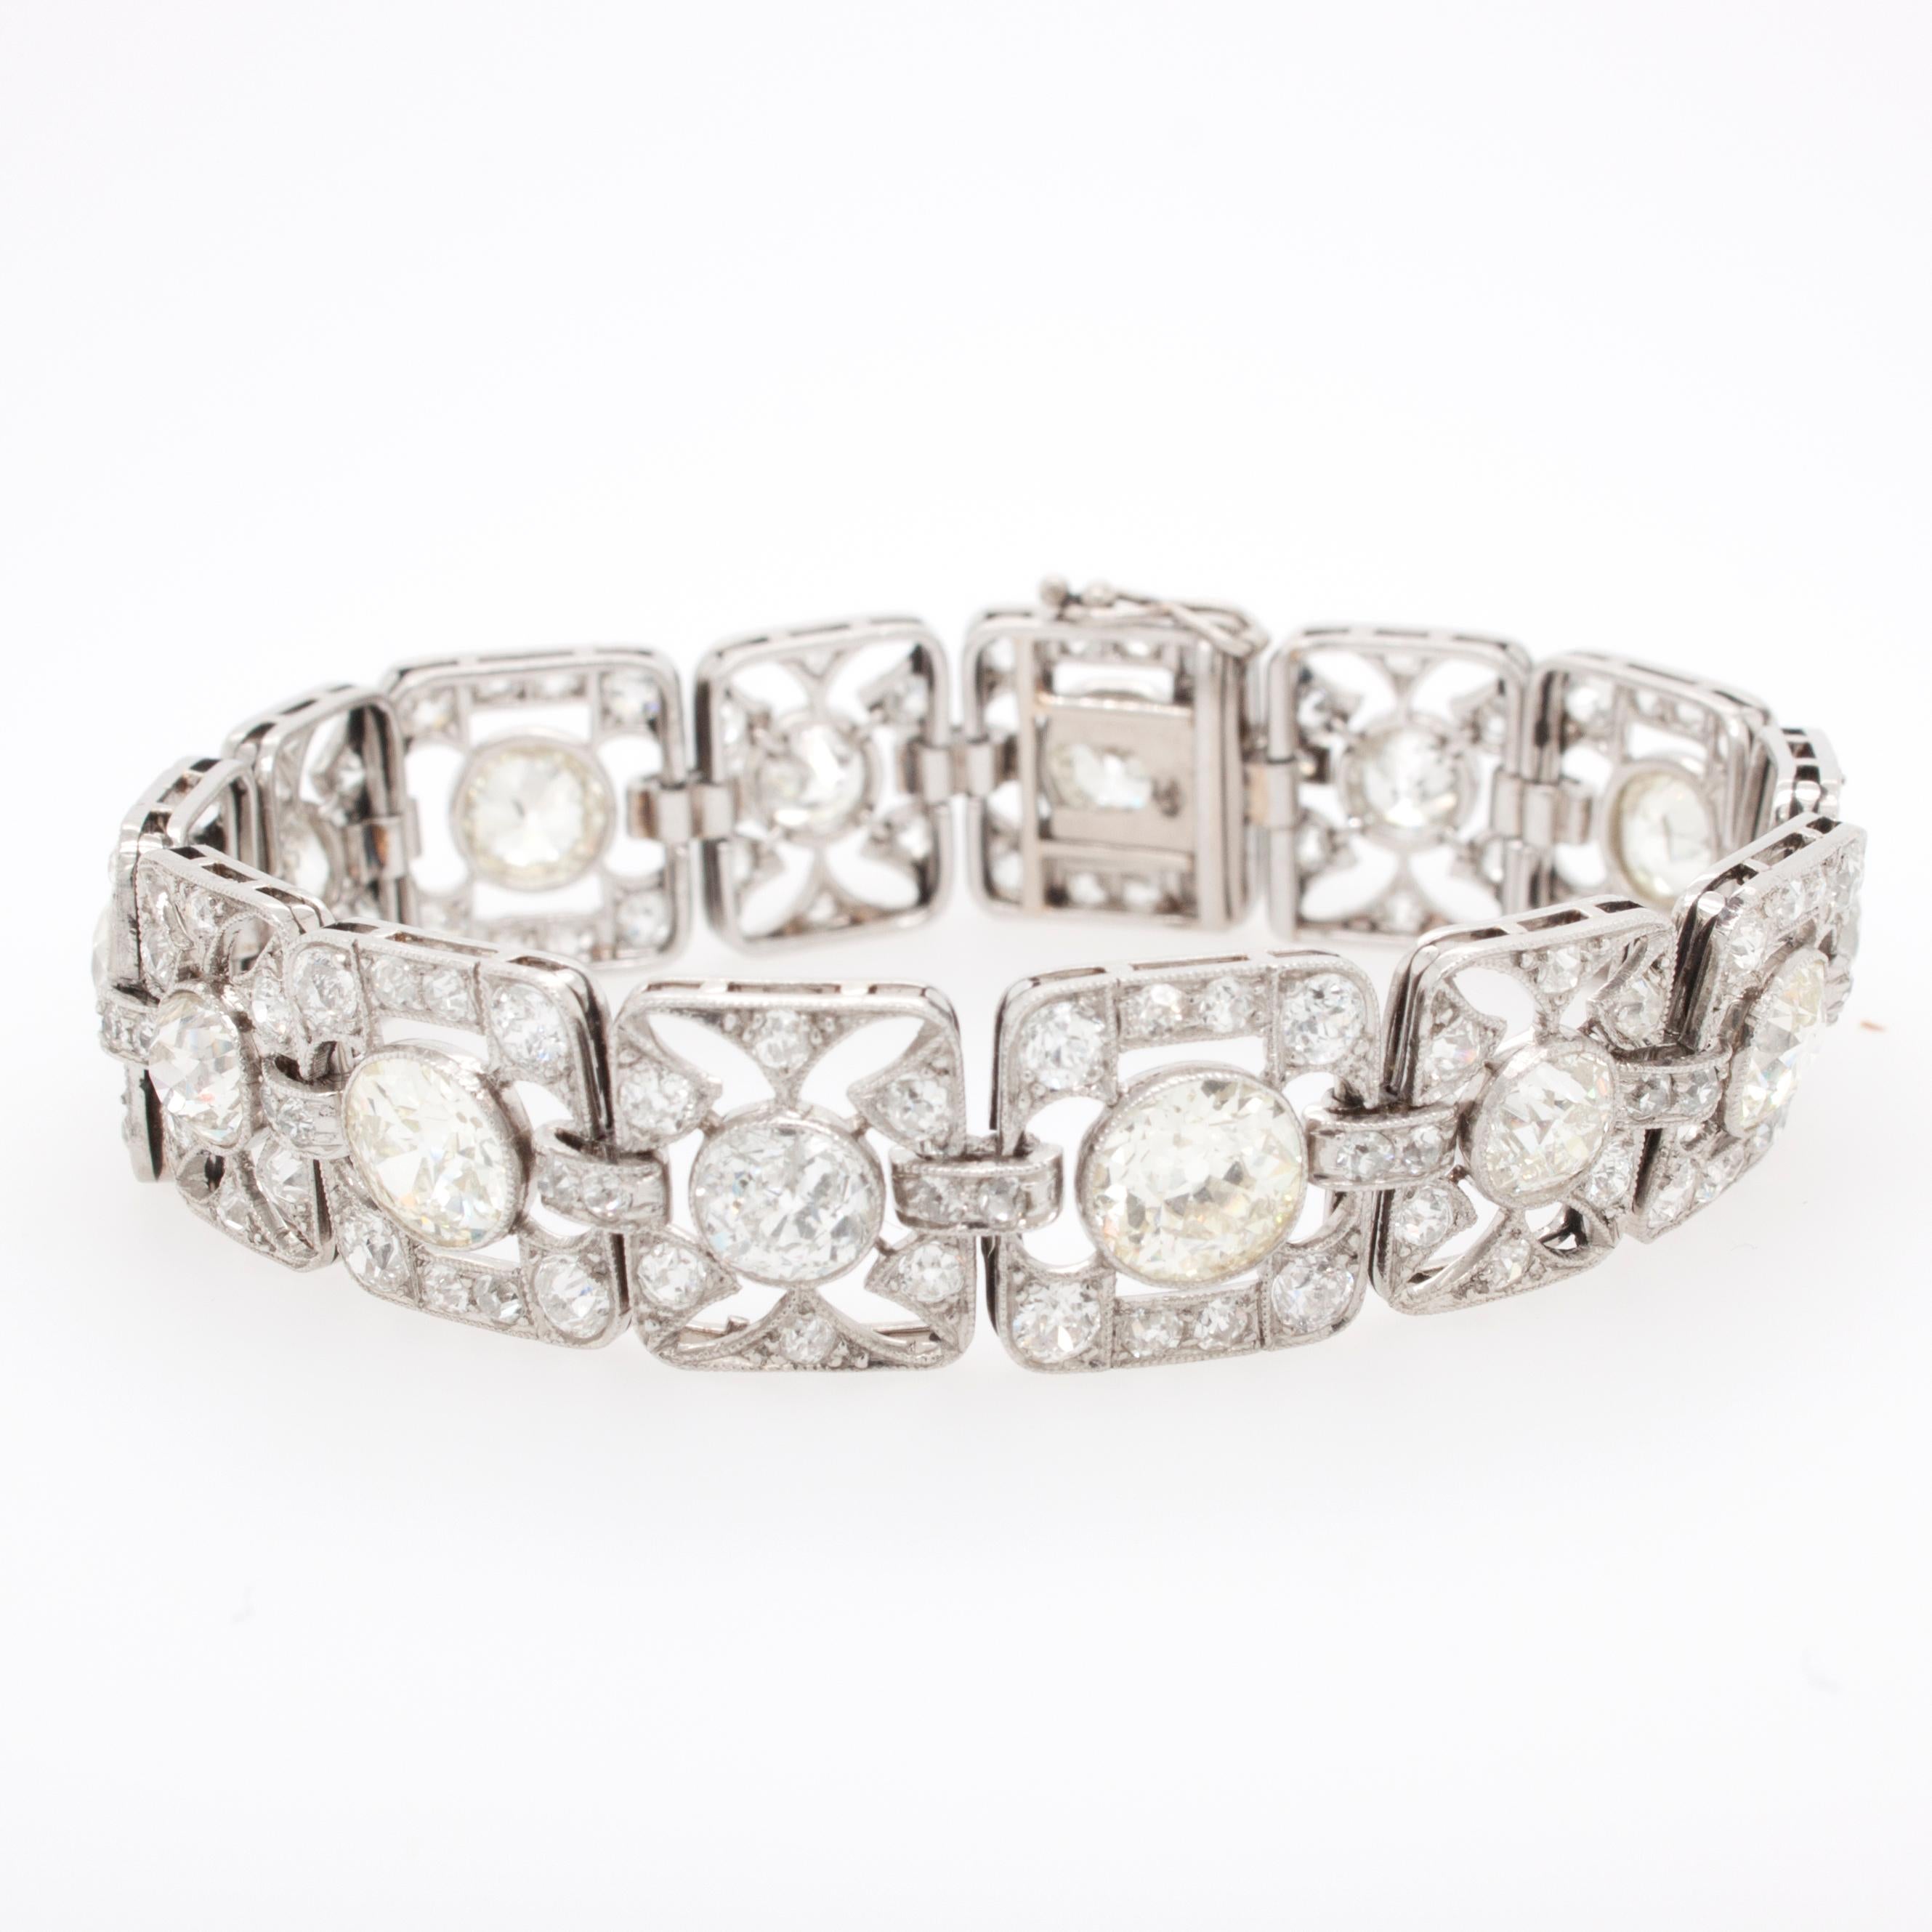 A beautiful and flexible Belle Epoque diamond bracelet, 1910s. The bracelet has 14 moveable parts in an alternating design, each set with a bigger old European cut diamond. The total diamond weight is approximately 18 carats. 

Bracelet length is